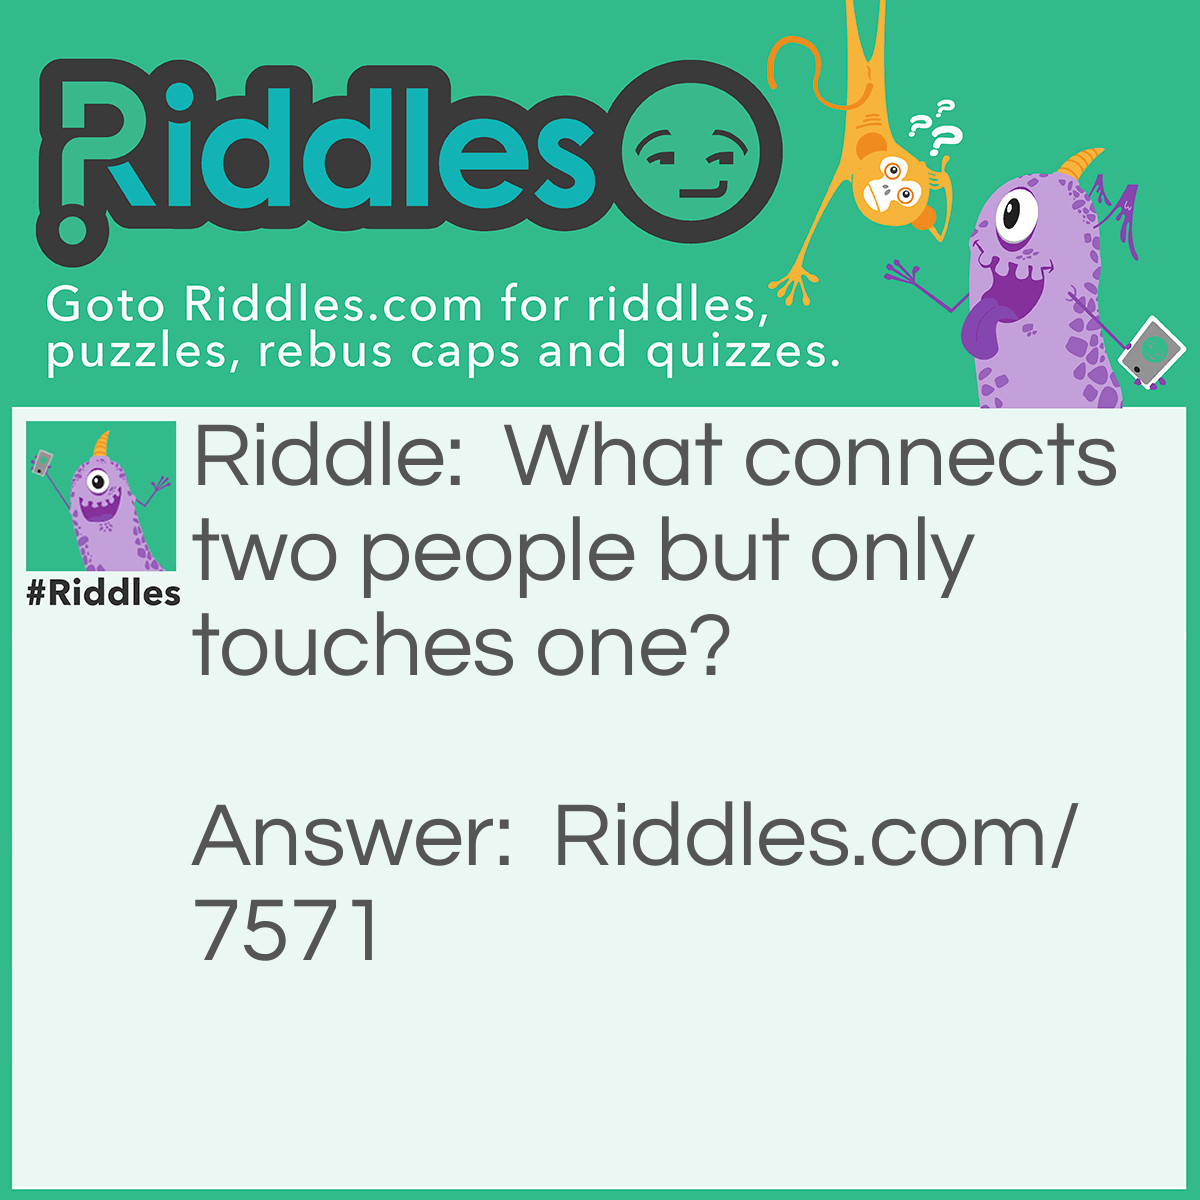 Riddle: What connects two people but only touches one? Answer: A wedding ring.